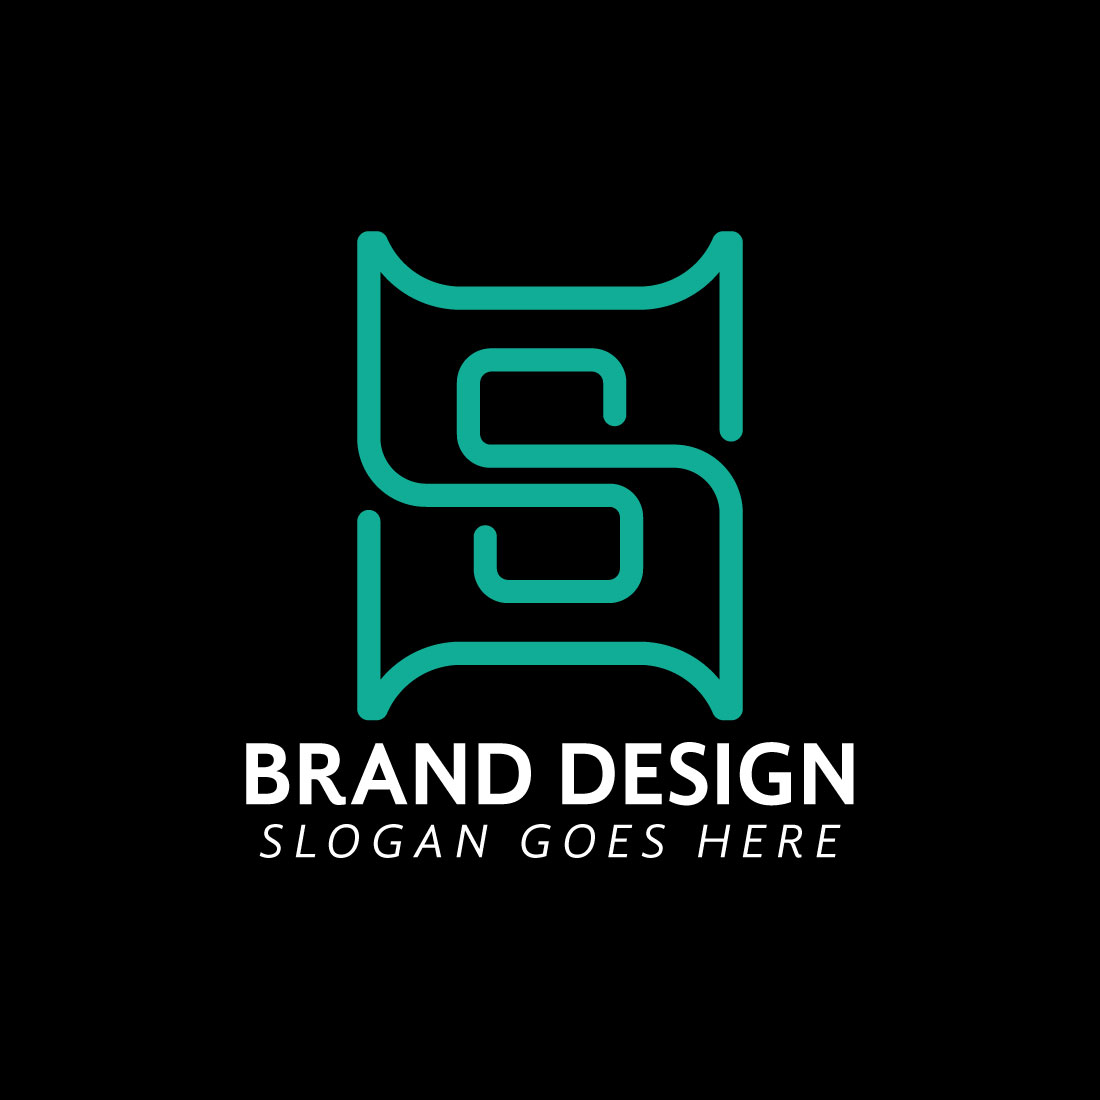 Letter SS logo design concept isolated on Black background cover image.